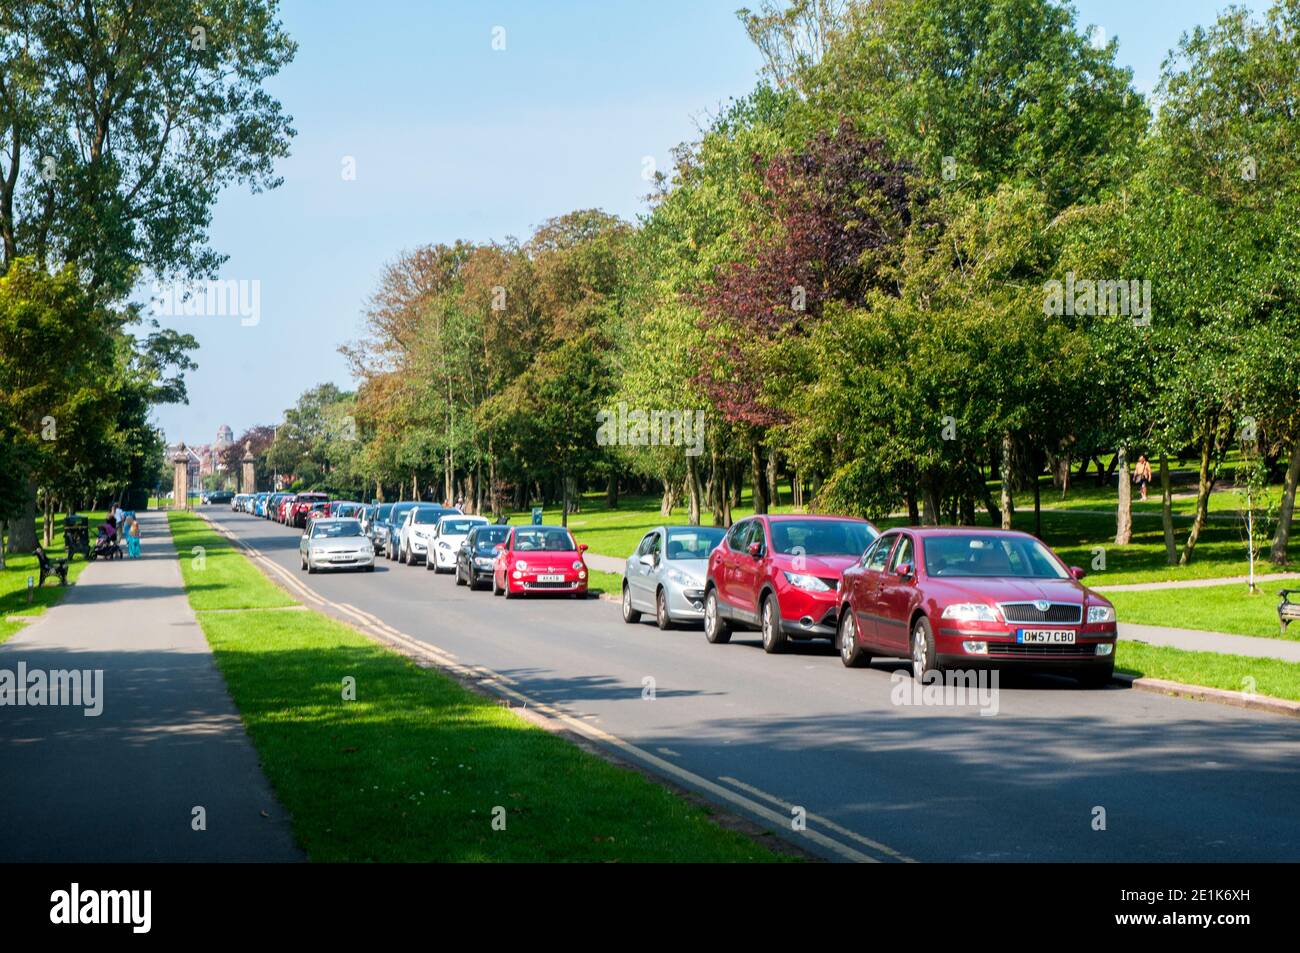 Cars parked on a bright sunny day with a car driving past along tree lined main driveway entrance to Stanley Park Blackpool Lancashire England UK Stock Photo